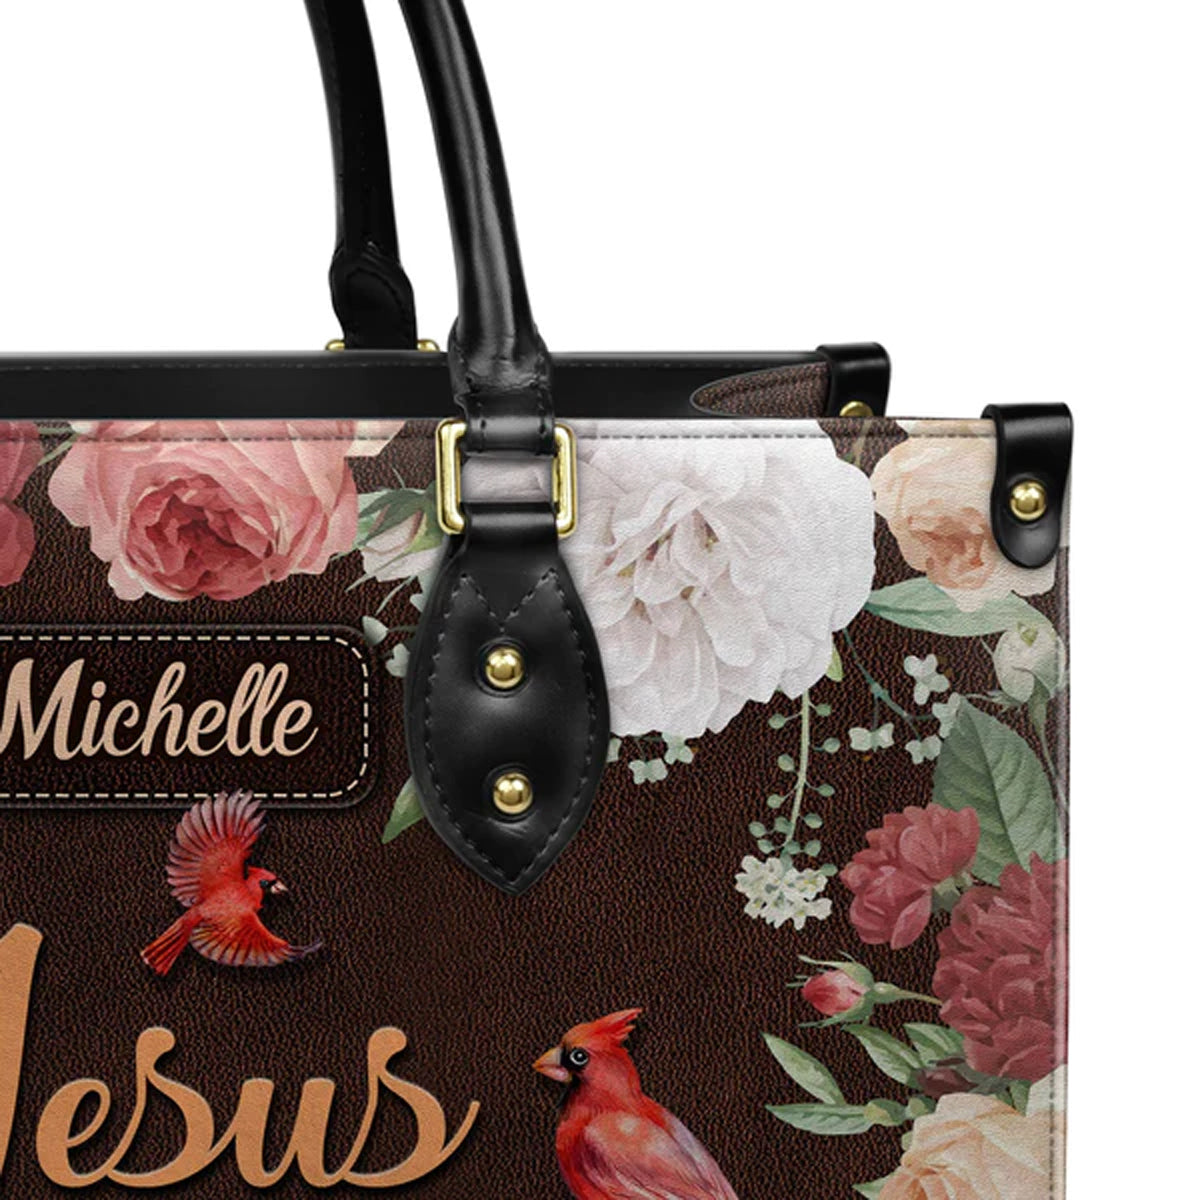 Christianart Designer Handbags, Jesus The Way The Truth The Life Cardinal Vintage Flower, Personalized Gifts, Gifts for Women, Christmas Gift. - Christian Art Bag